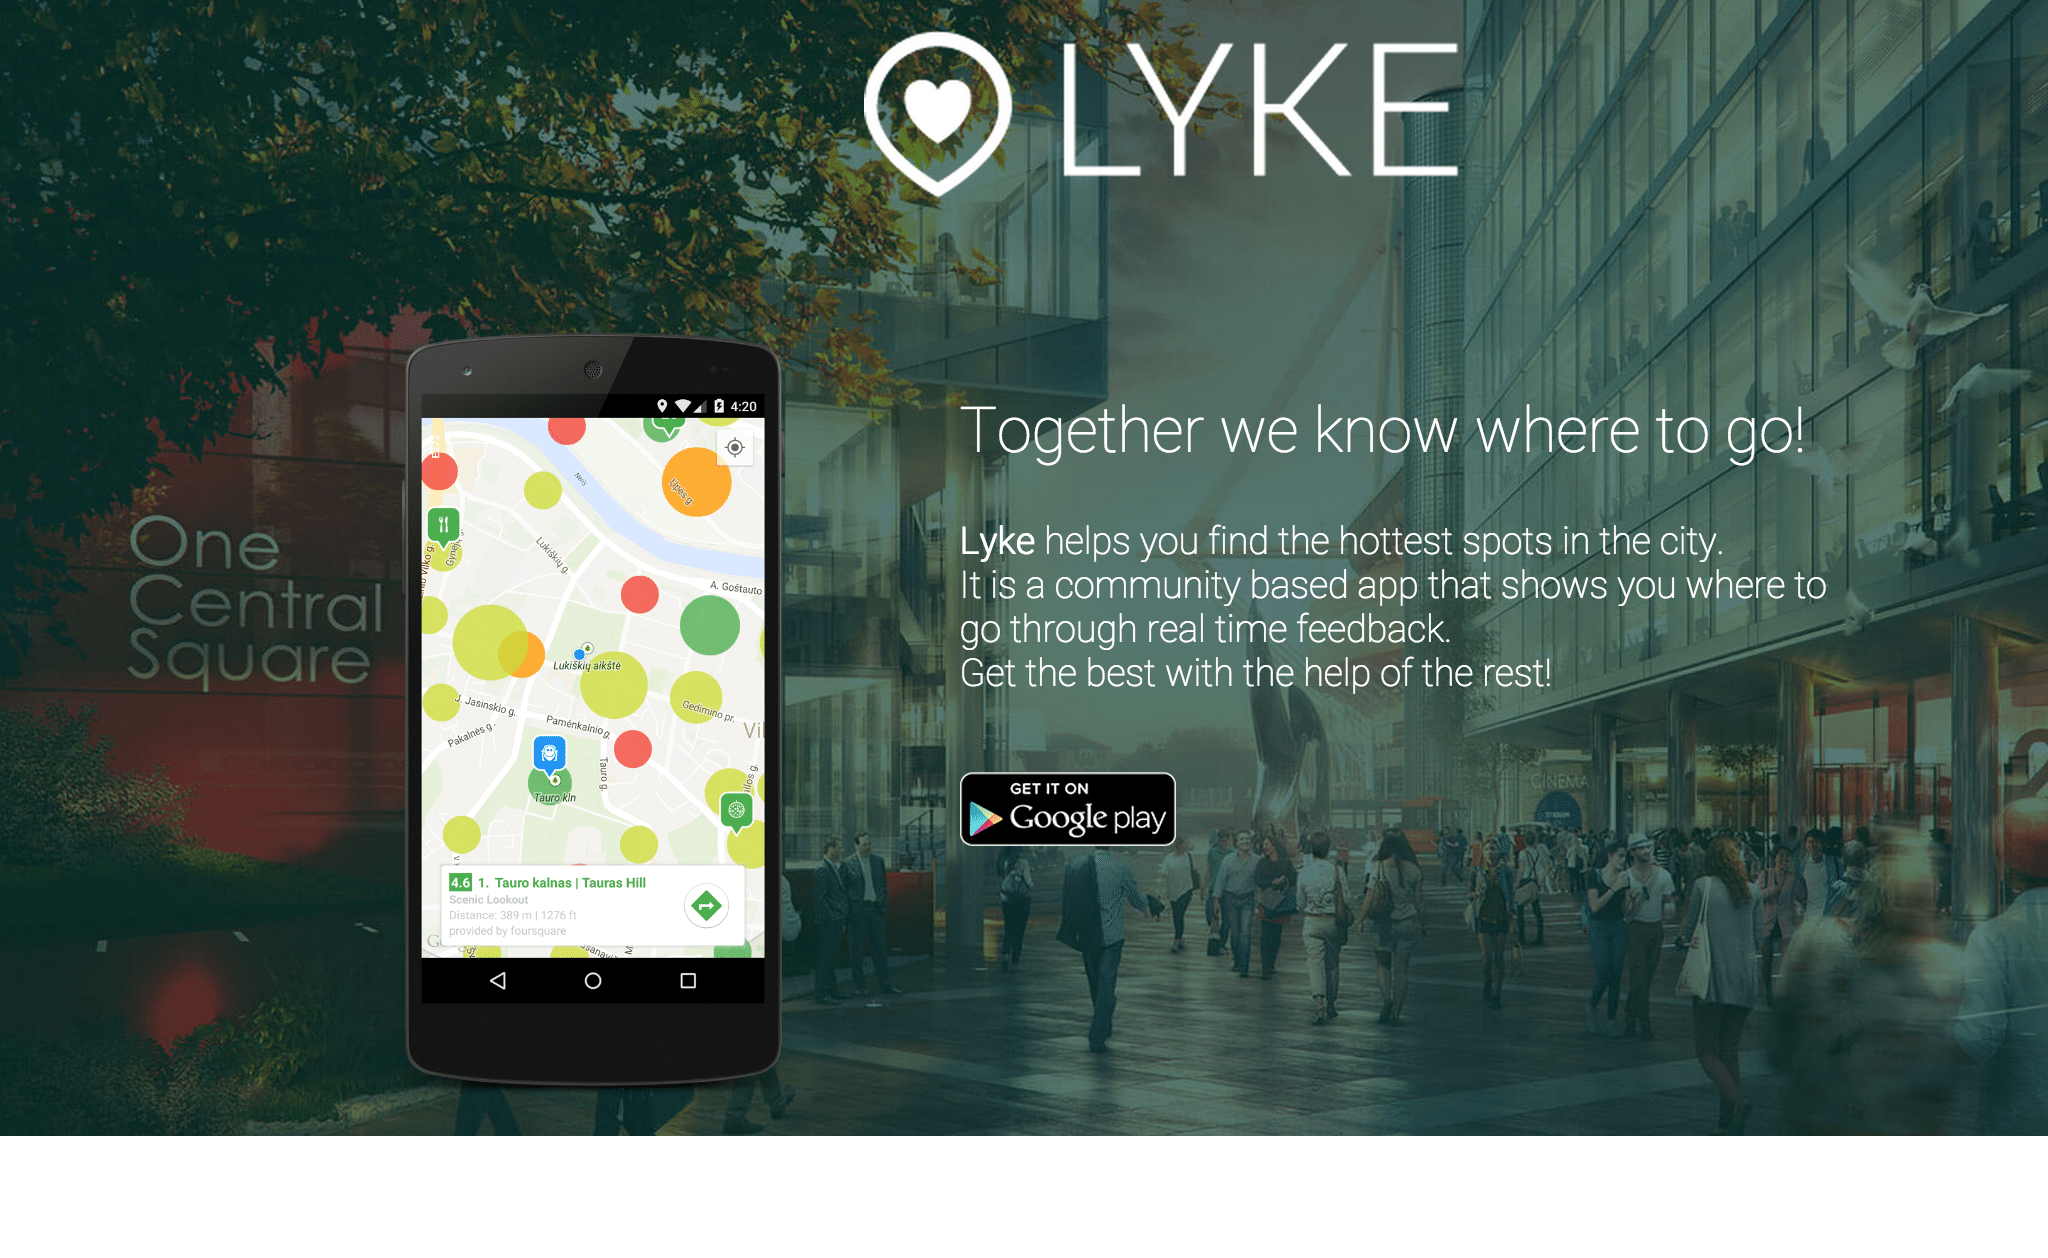 Lyke is a community-based app helping travelers find the hottest spots in a city through real-time feedback. 